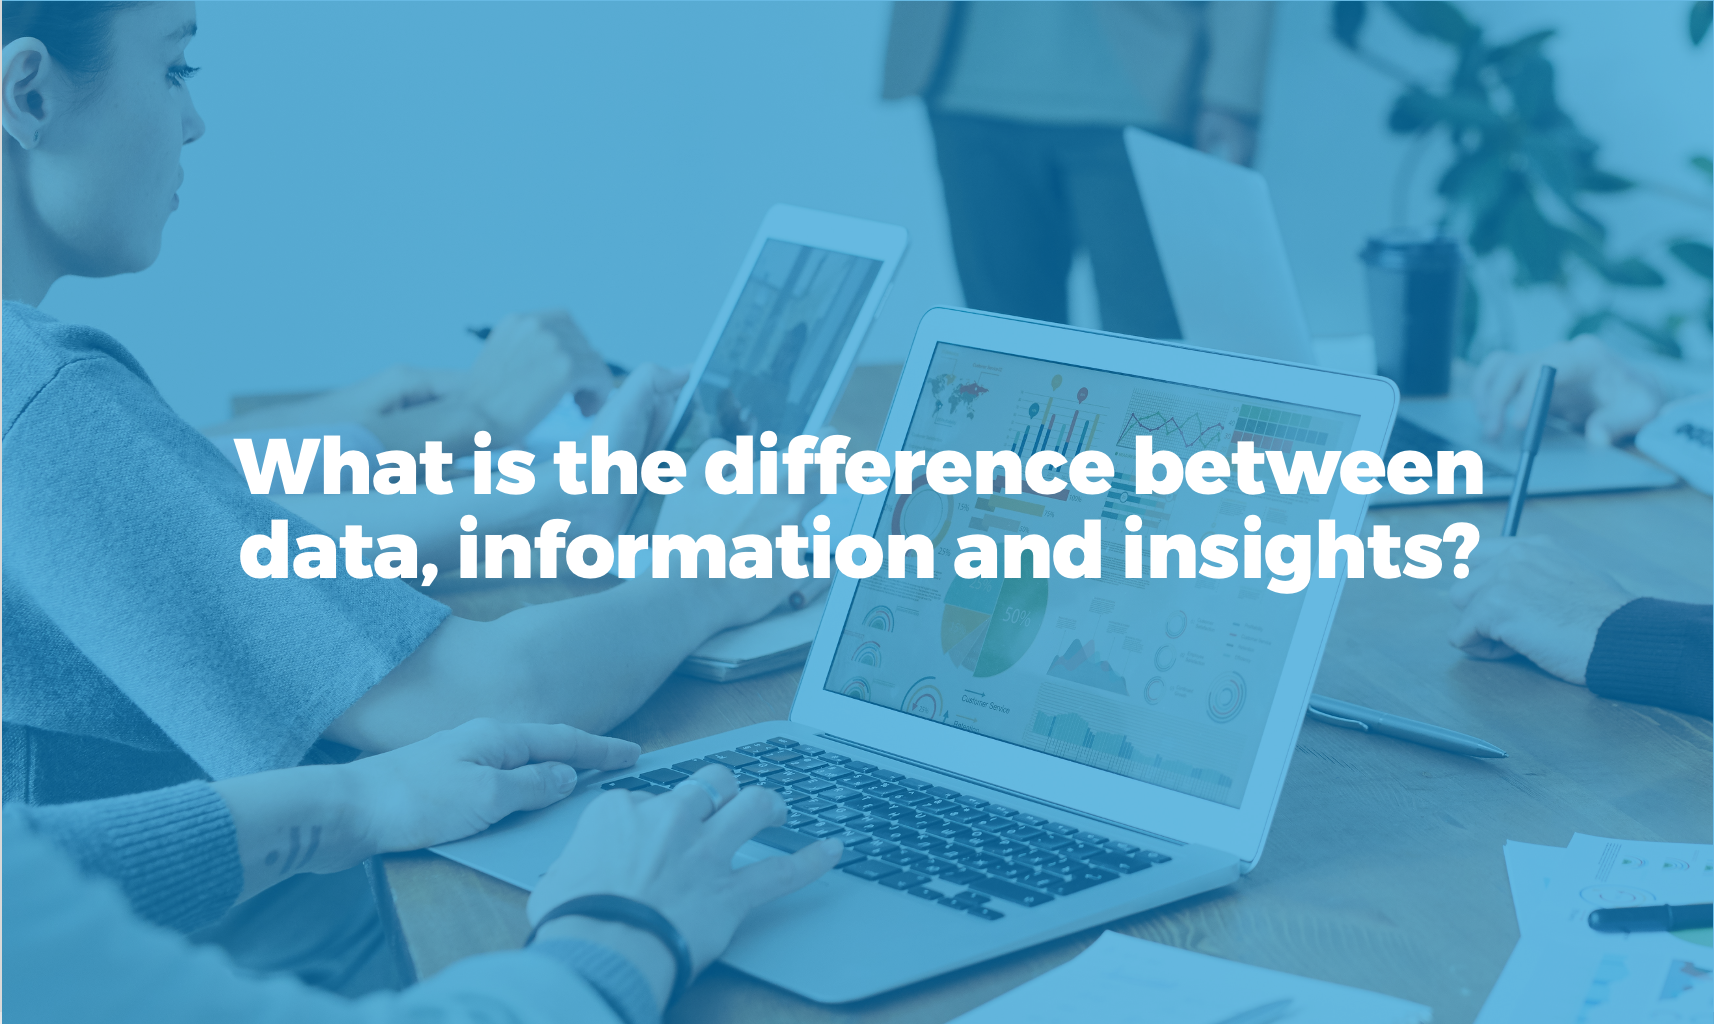 Bismart difference between data and information insights